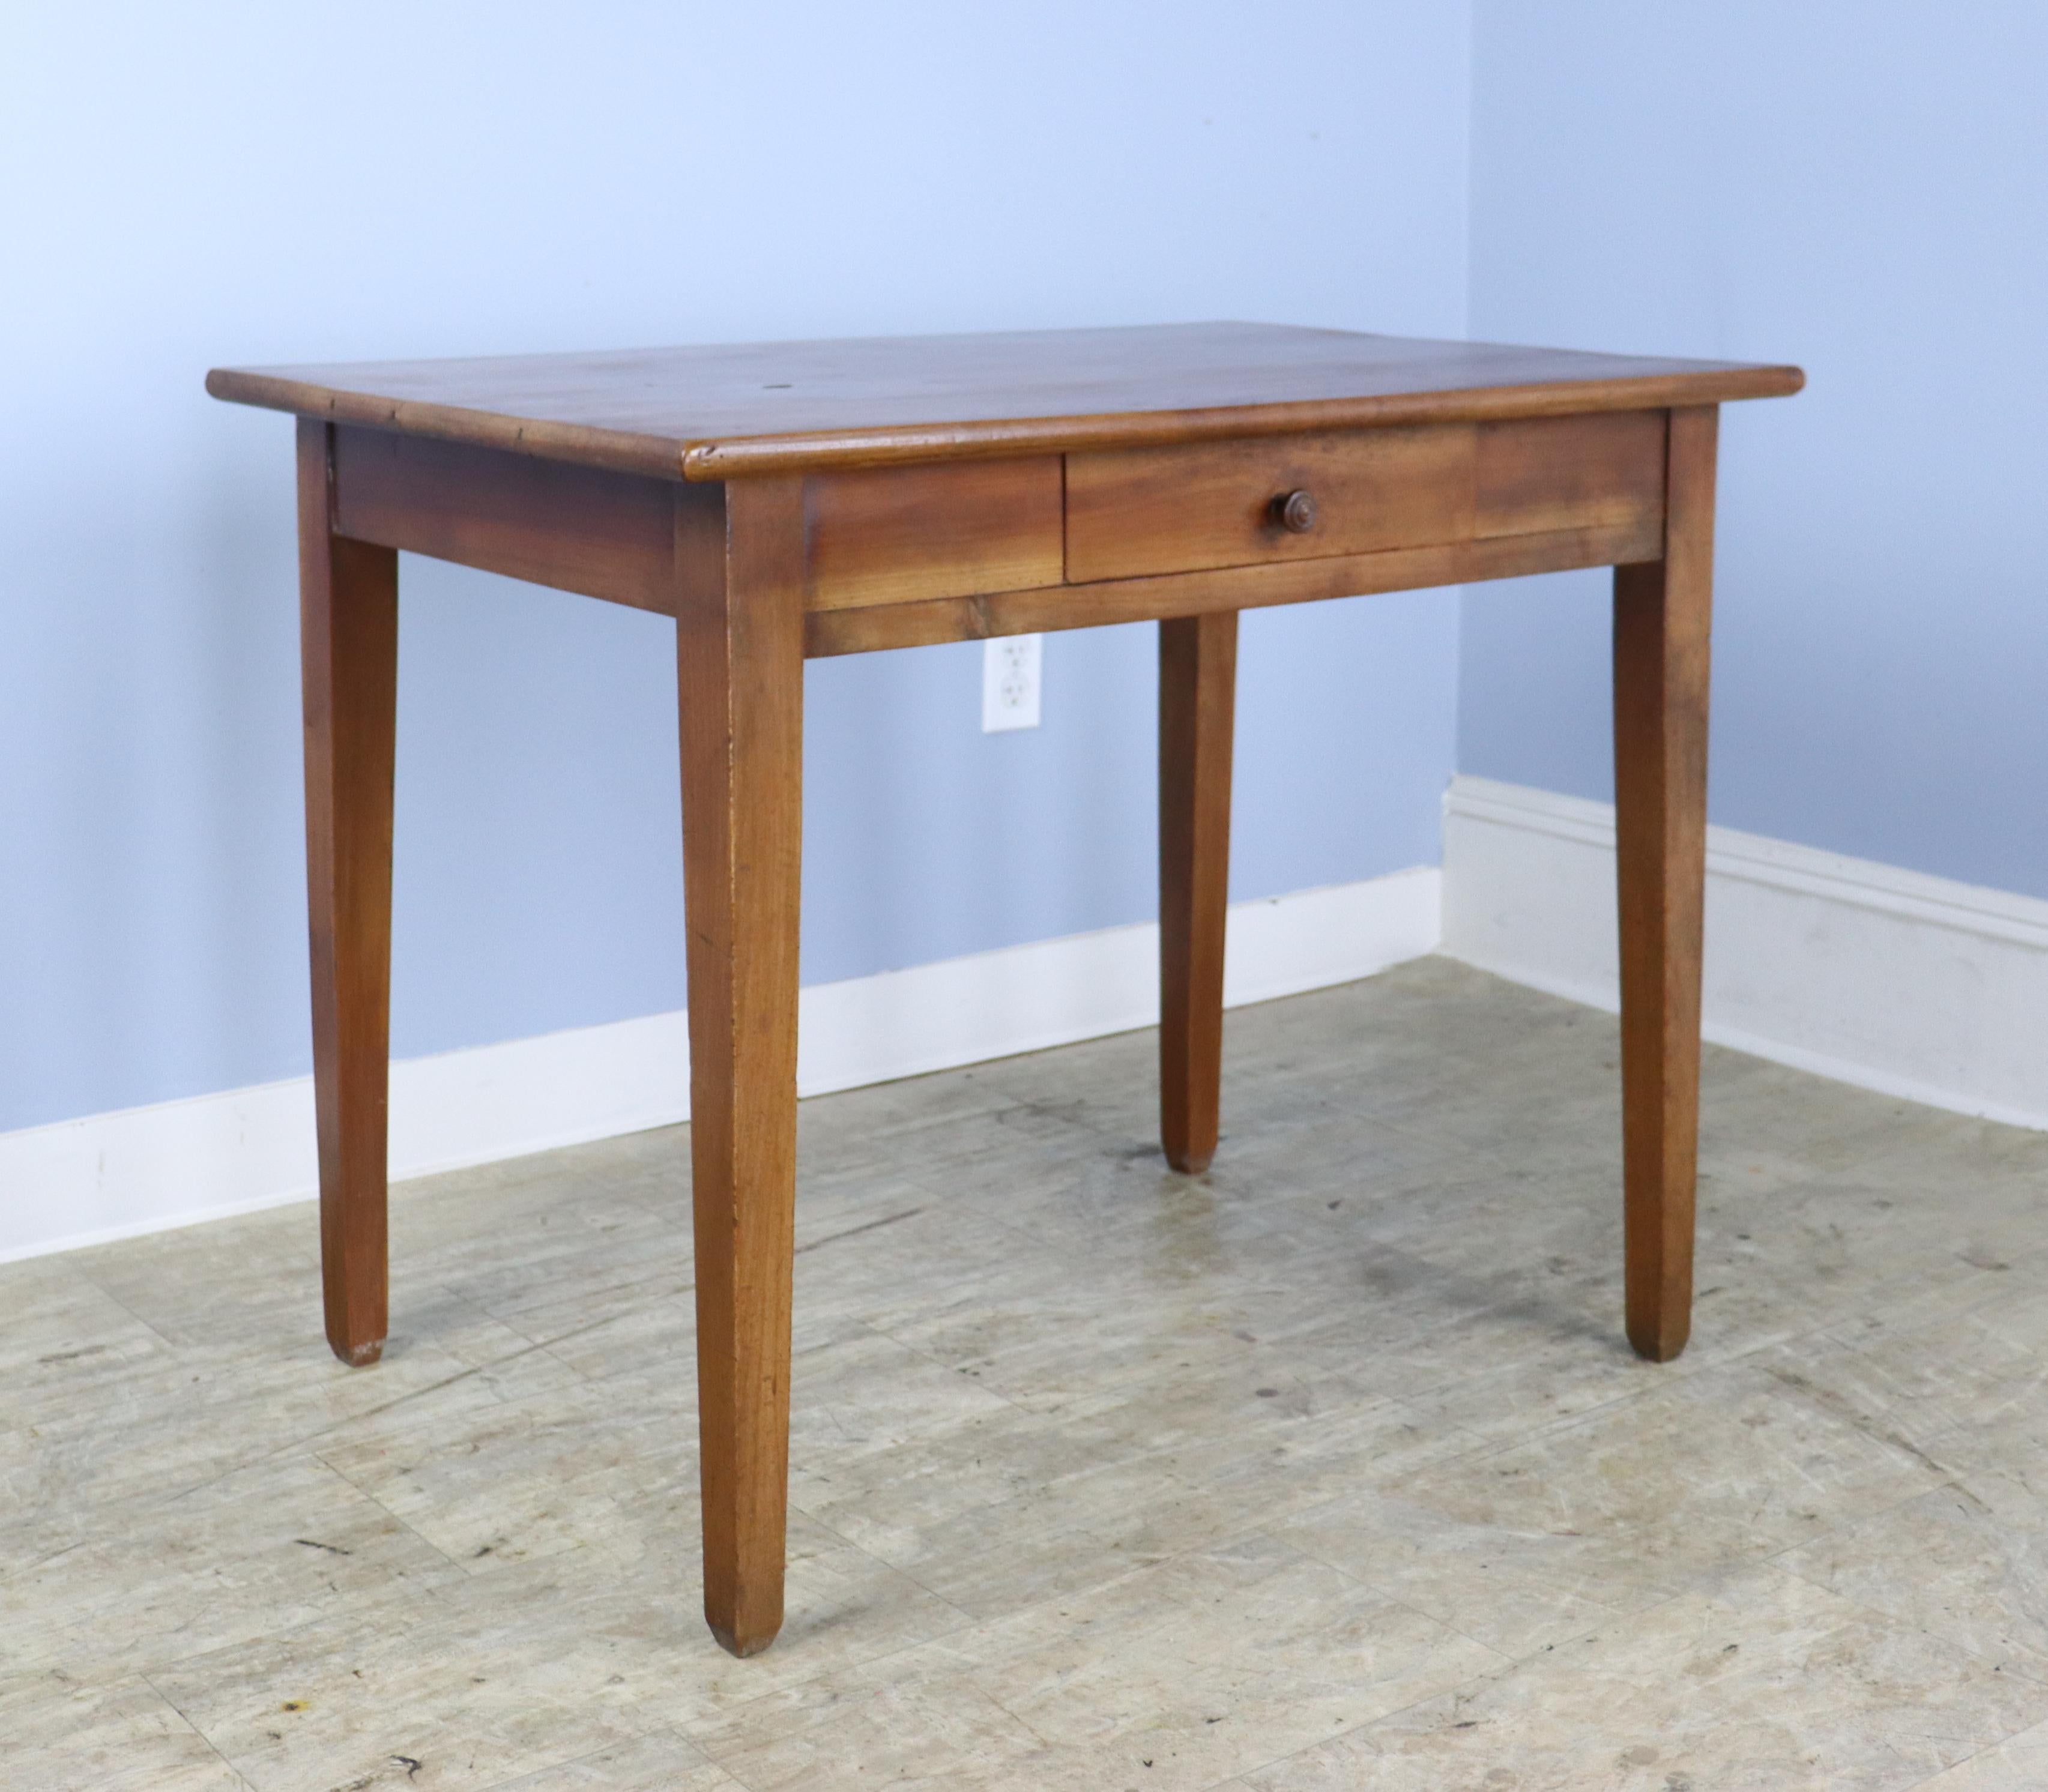 A simple handsome side table or smaller writing table/desk in vibrant cherry. Classic tapered legs and a single drawer. We have put this table in the writing table or desk category because while it would make a good side, end or lamp table, it has a